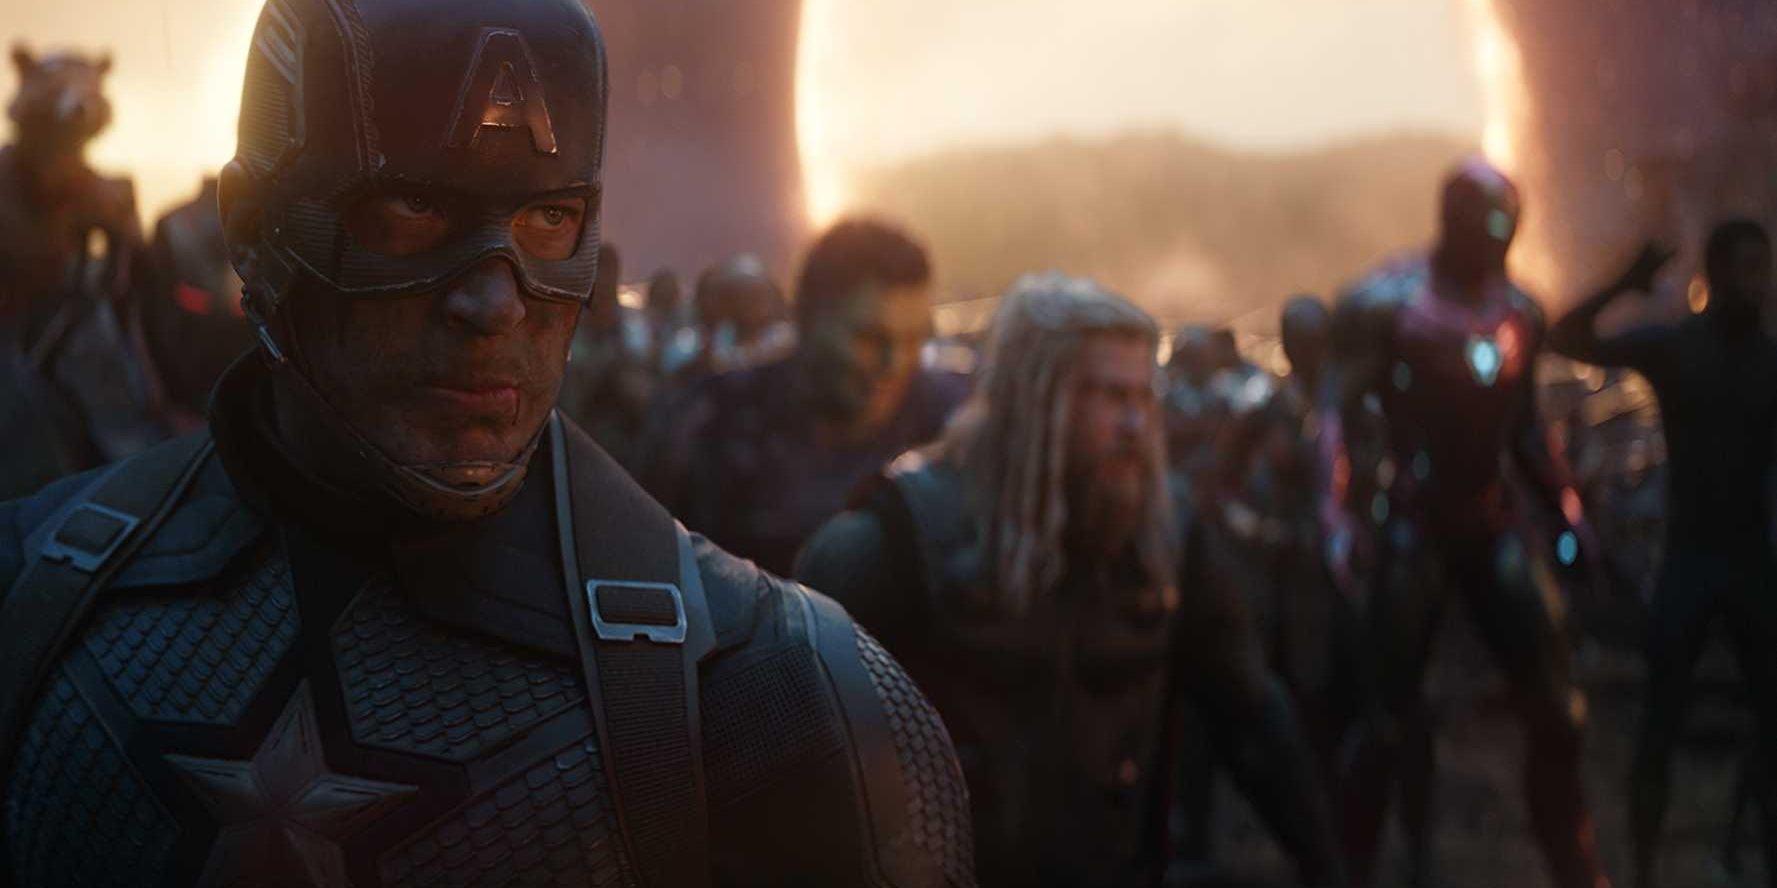 Captain America stands with the rest of the Avengers behind him ready for battle